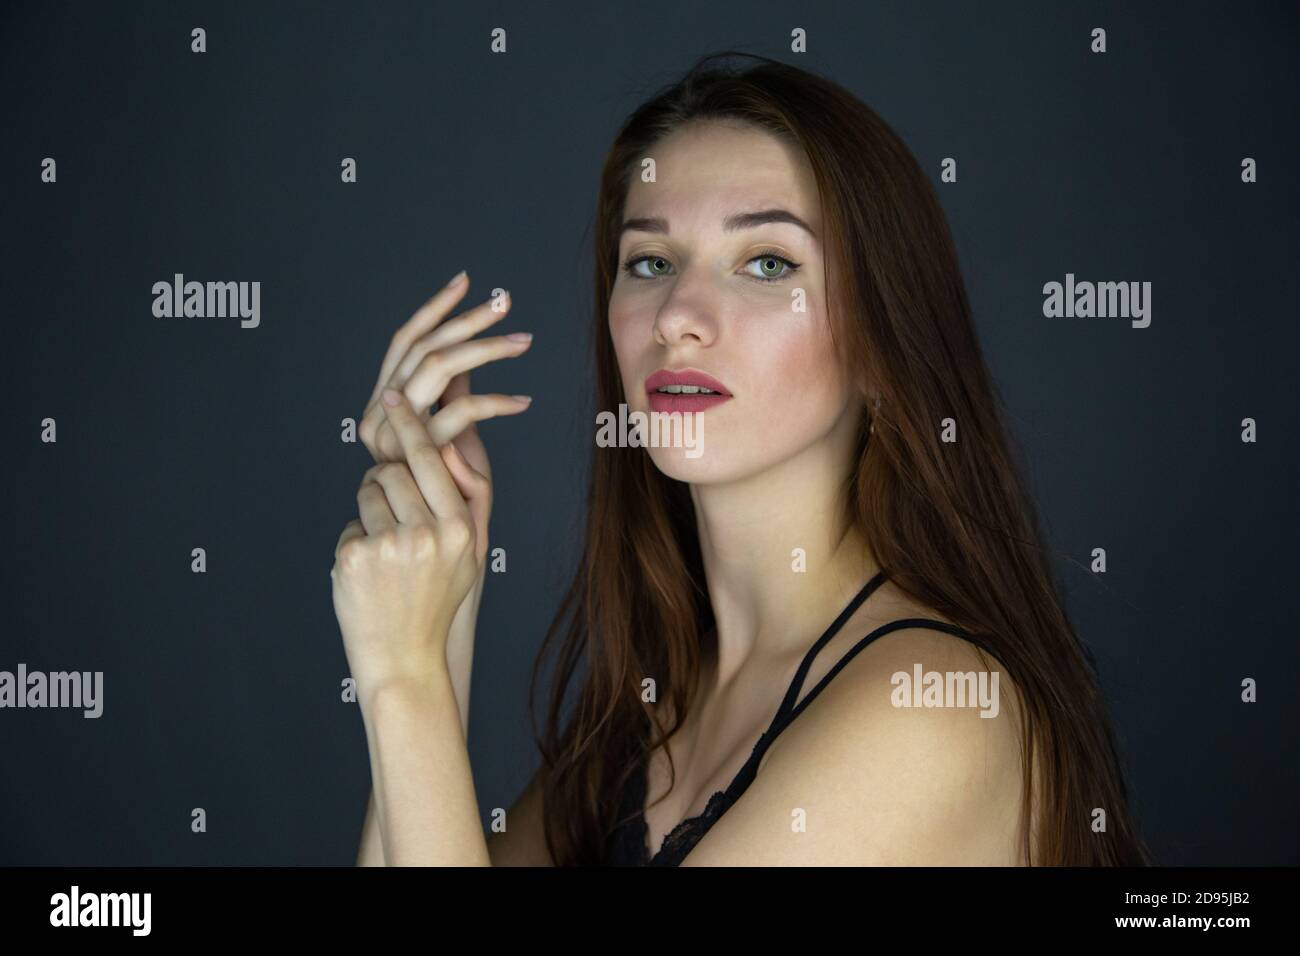 Shot of young brunette woman with long hair on dark background Stock Photo